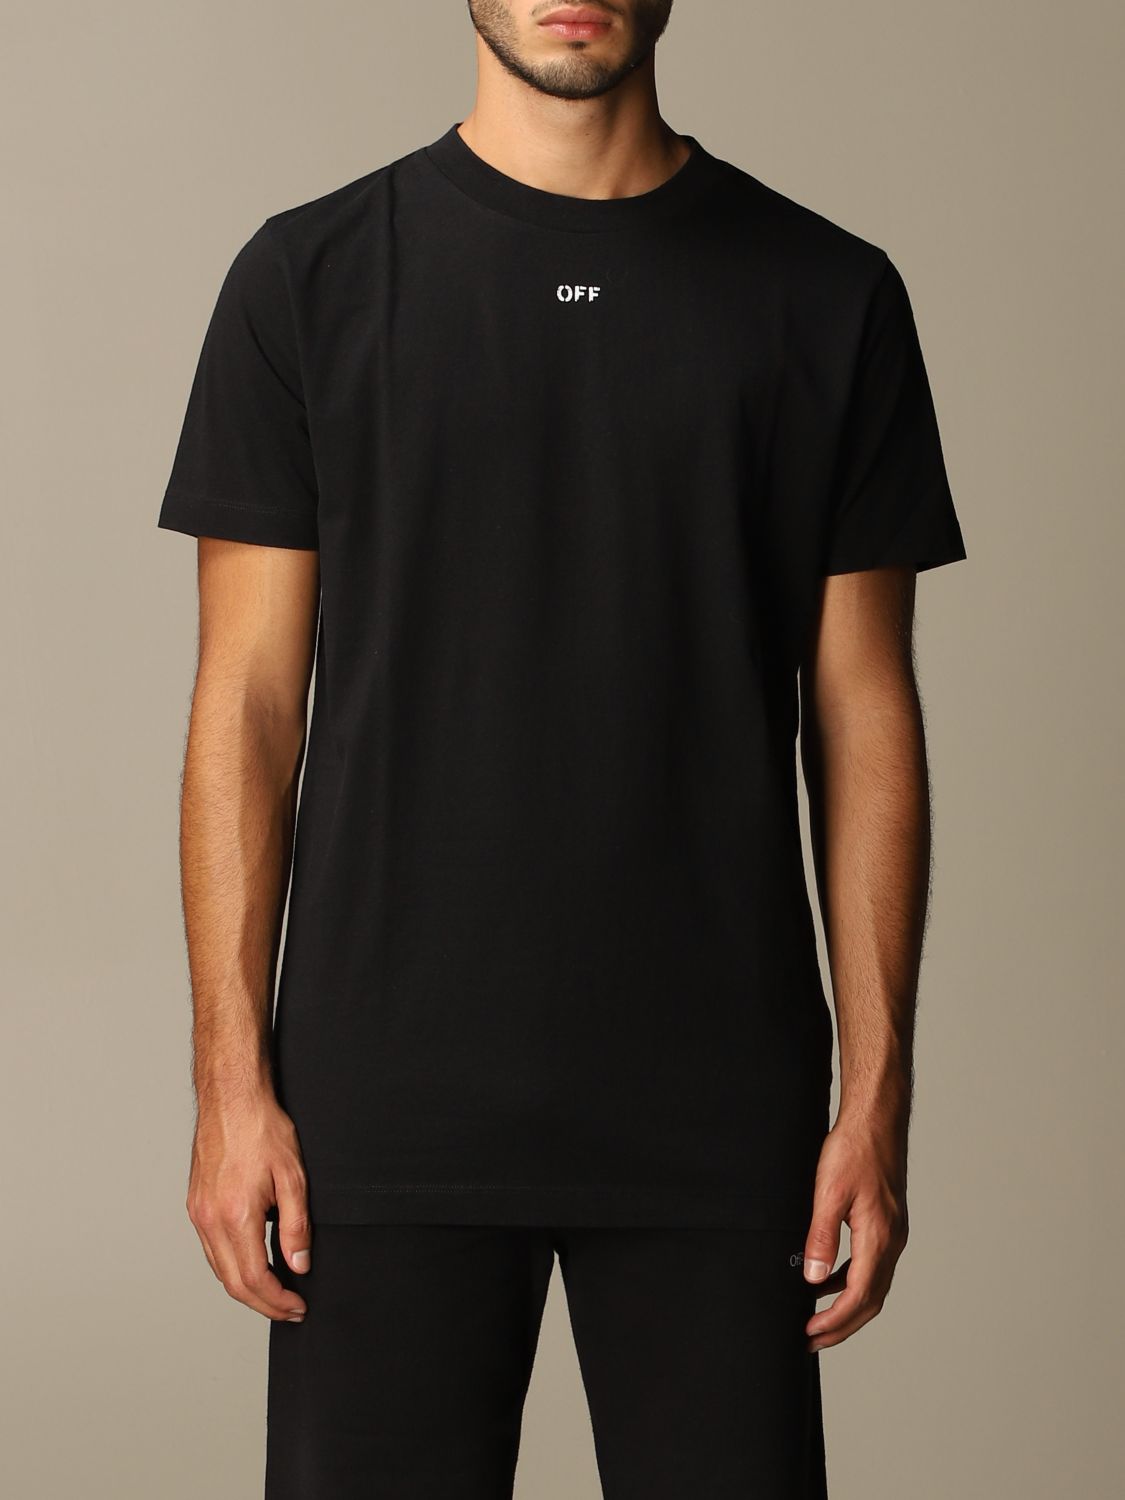 OFF-WHITE: Off White cotton t-shirt with printed arrows - Black | Off ...